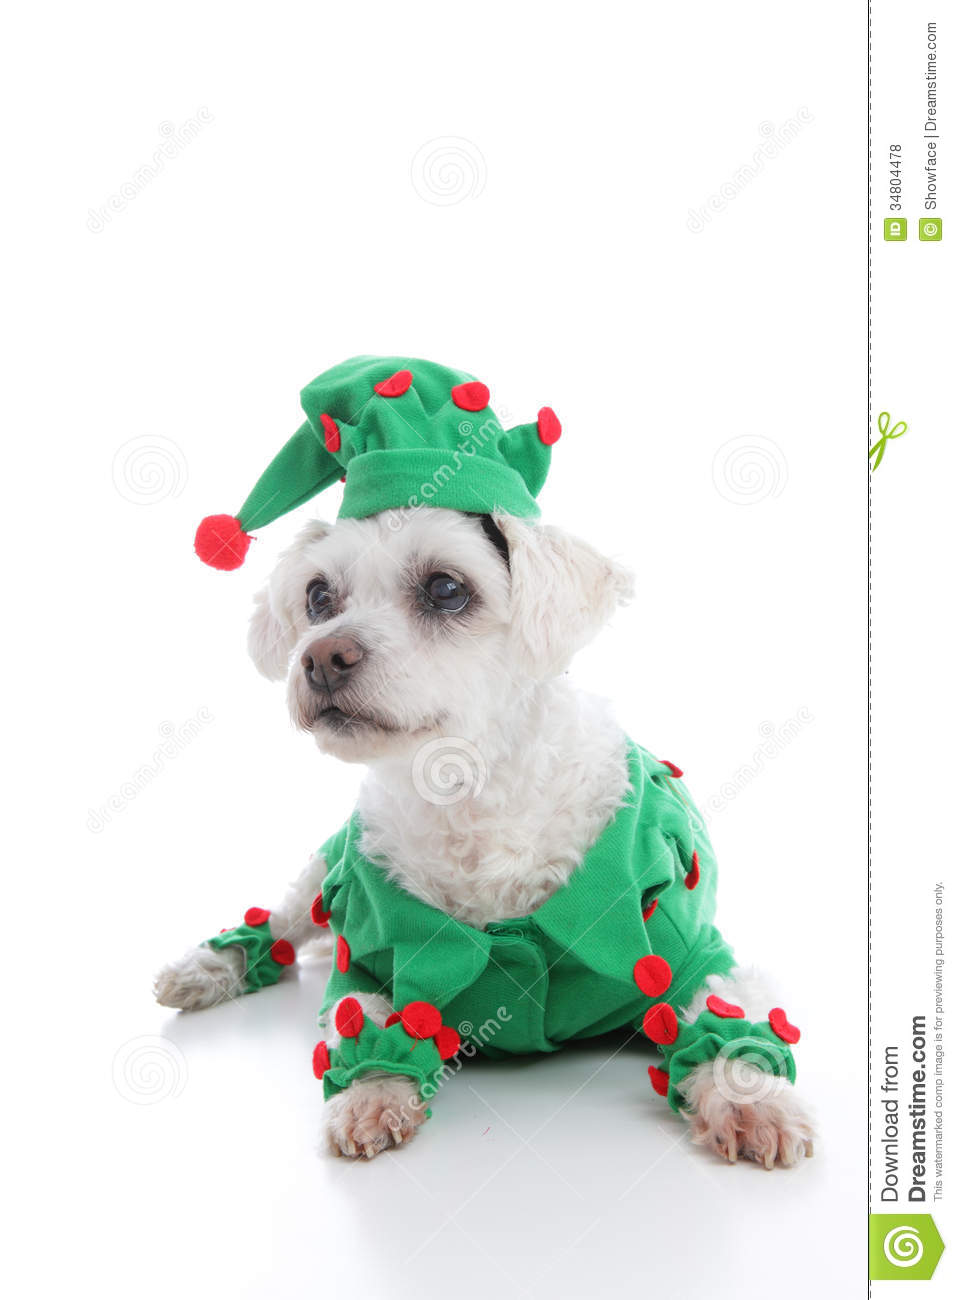 Small Pet Dog Wearing A Green And Red Elf Or Jester Costume And    